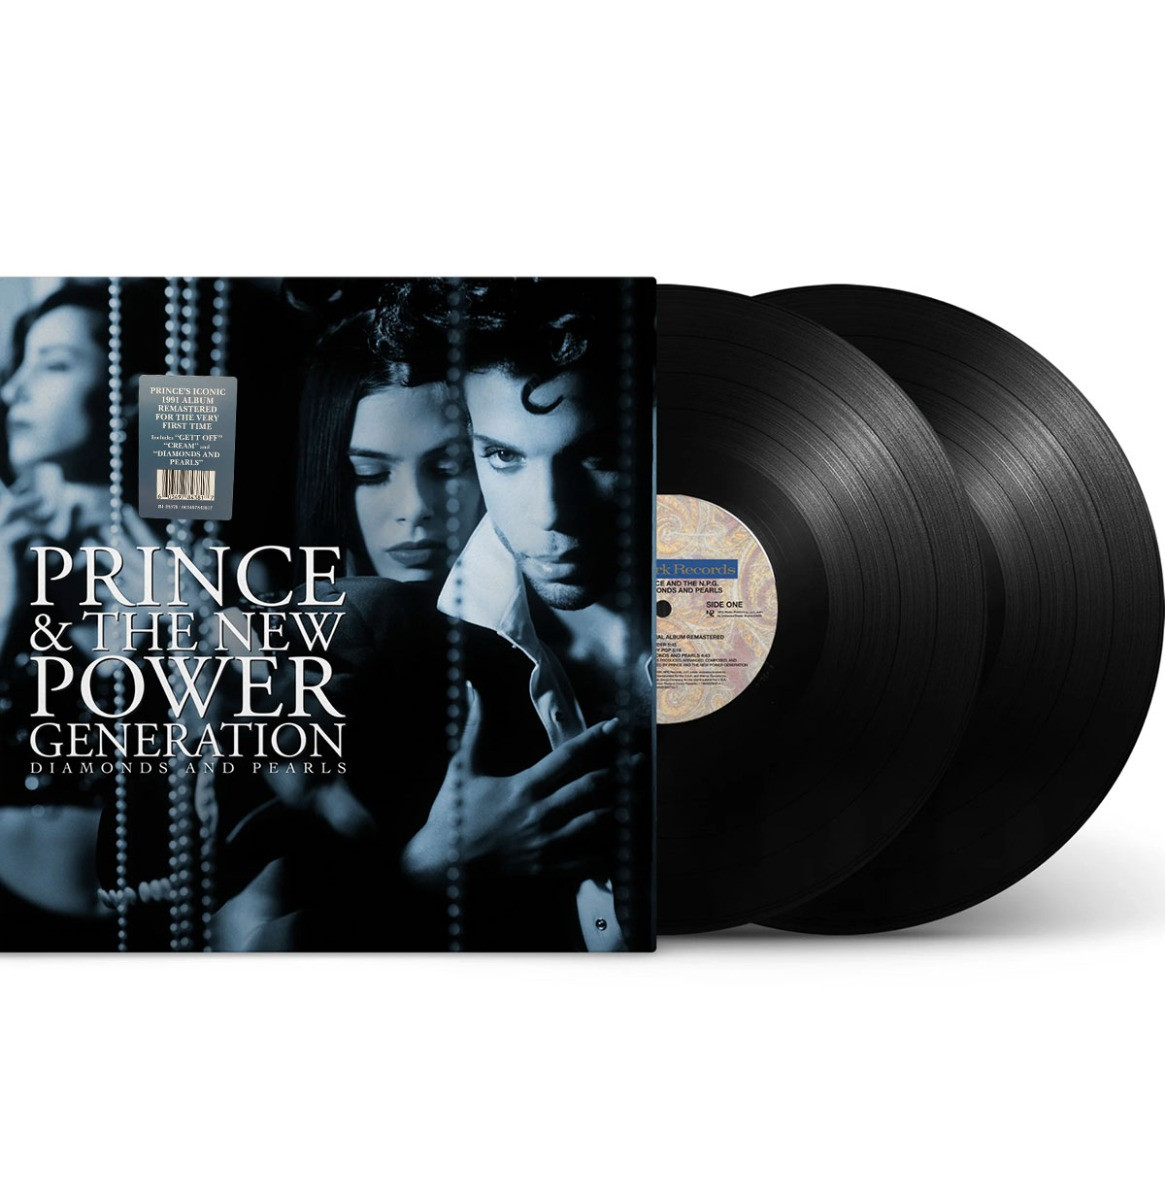 Prince & The New Power Generation - Diamonds And Pearls 2LP